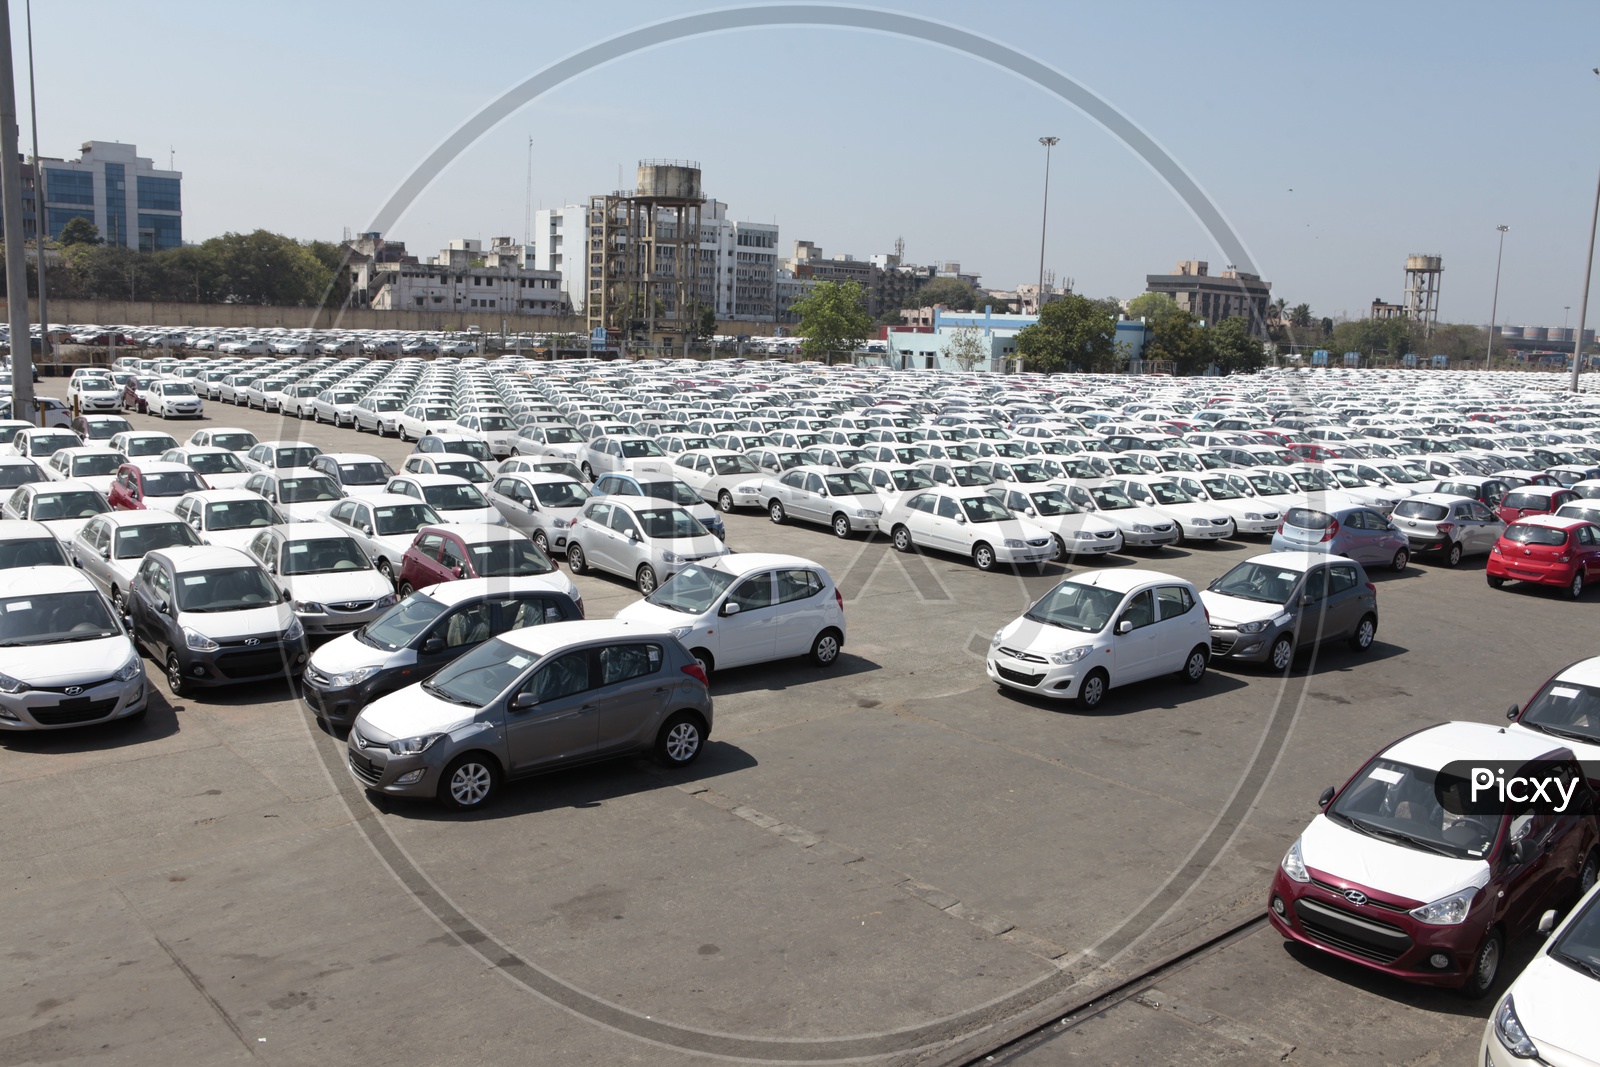 Hyundai brand new cars parked in line imported by the port area